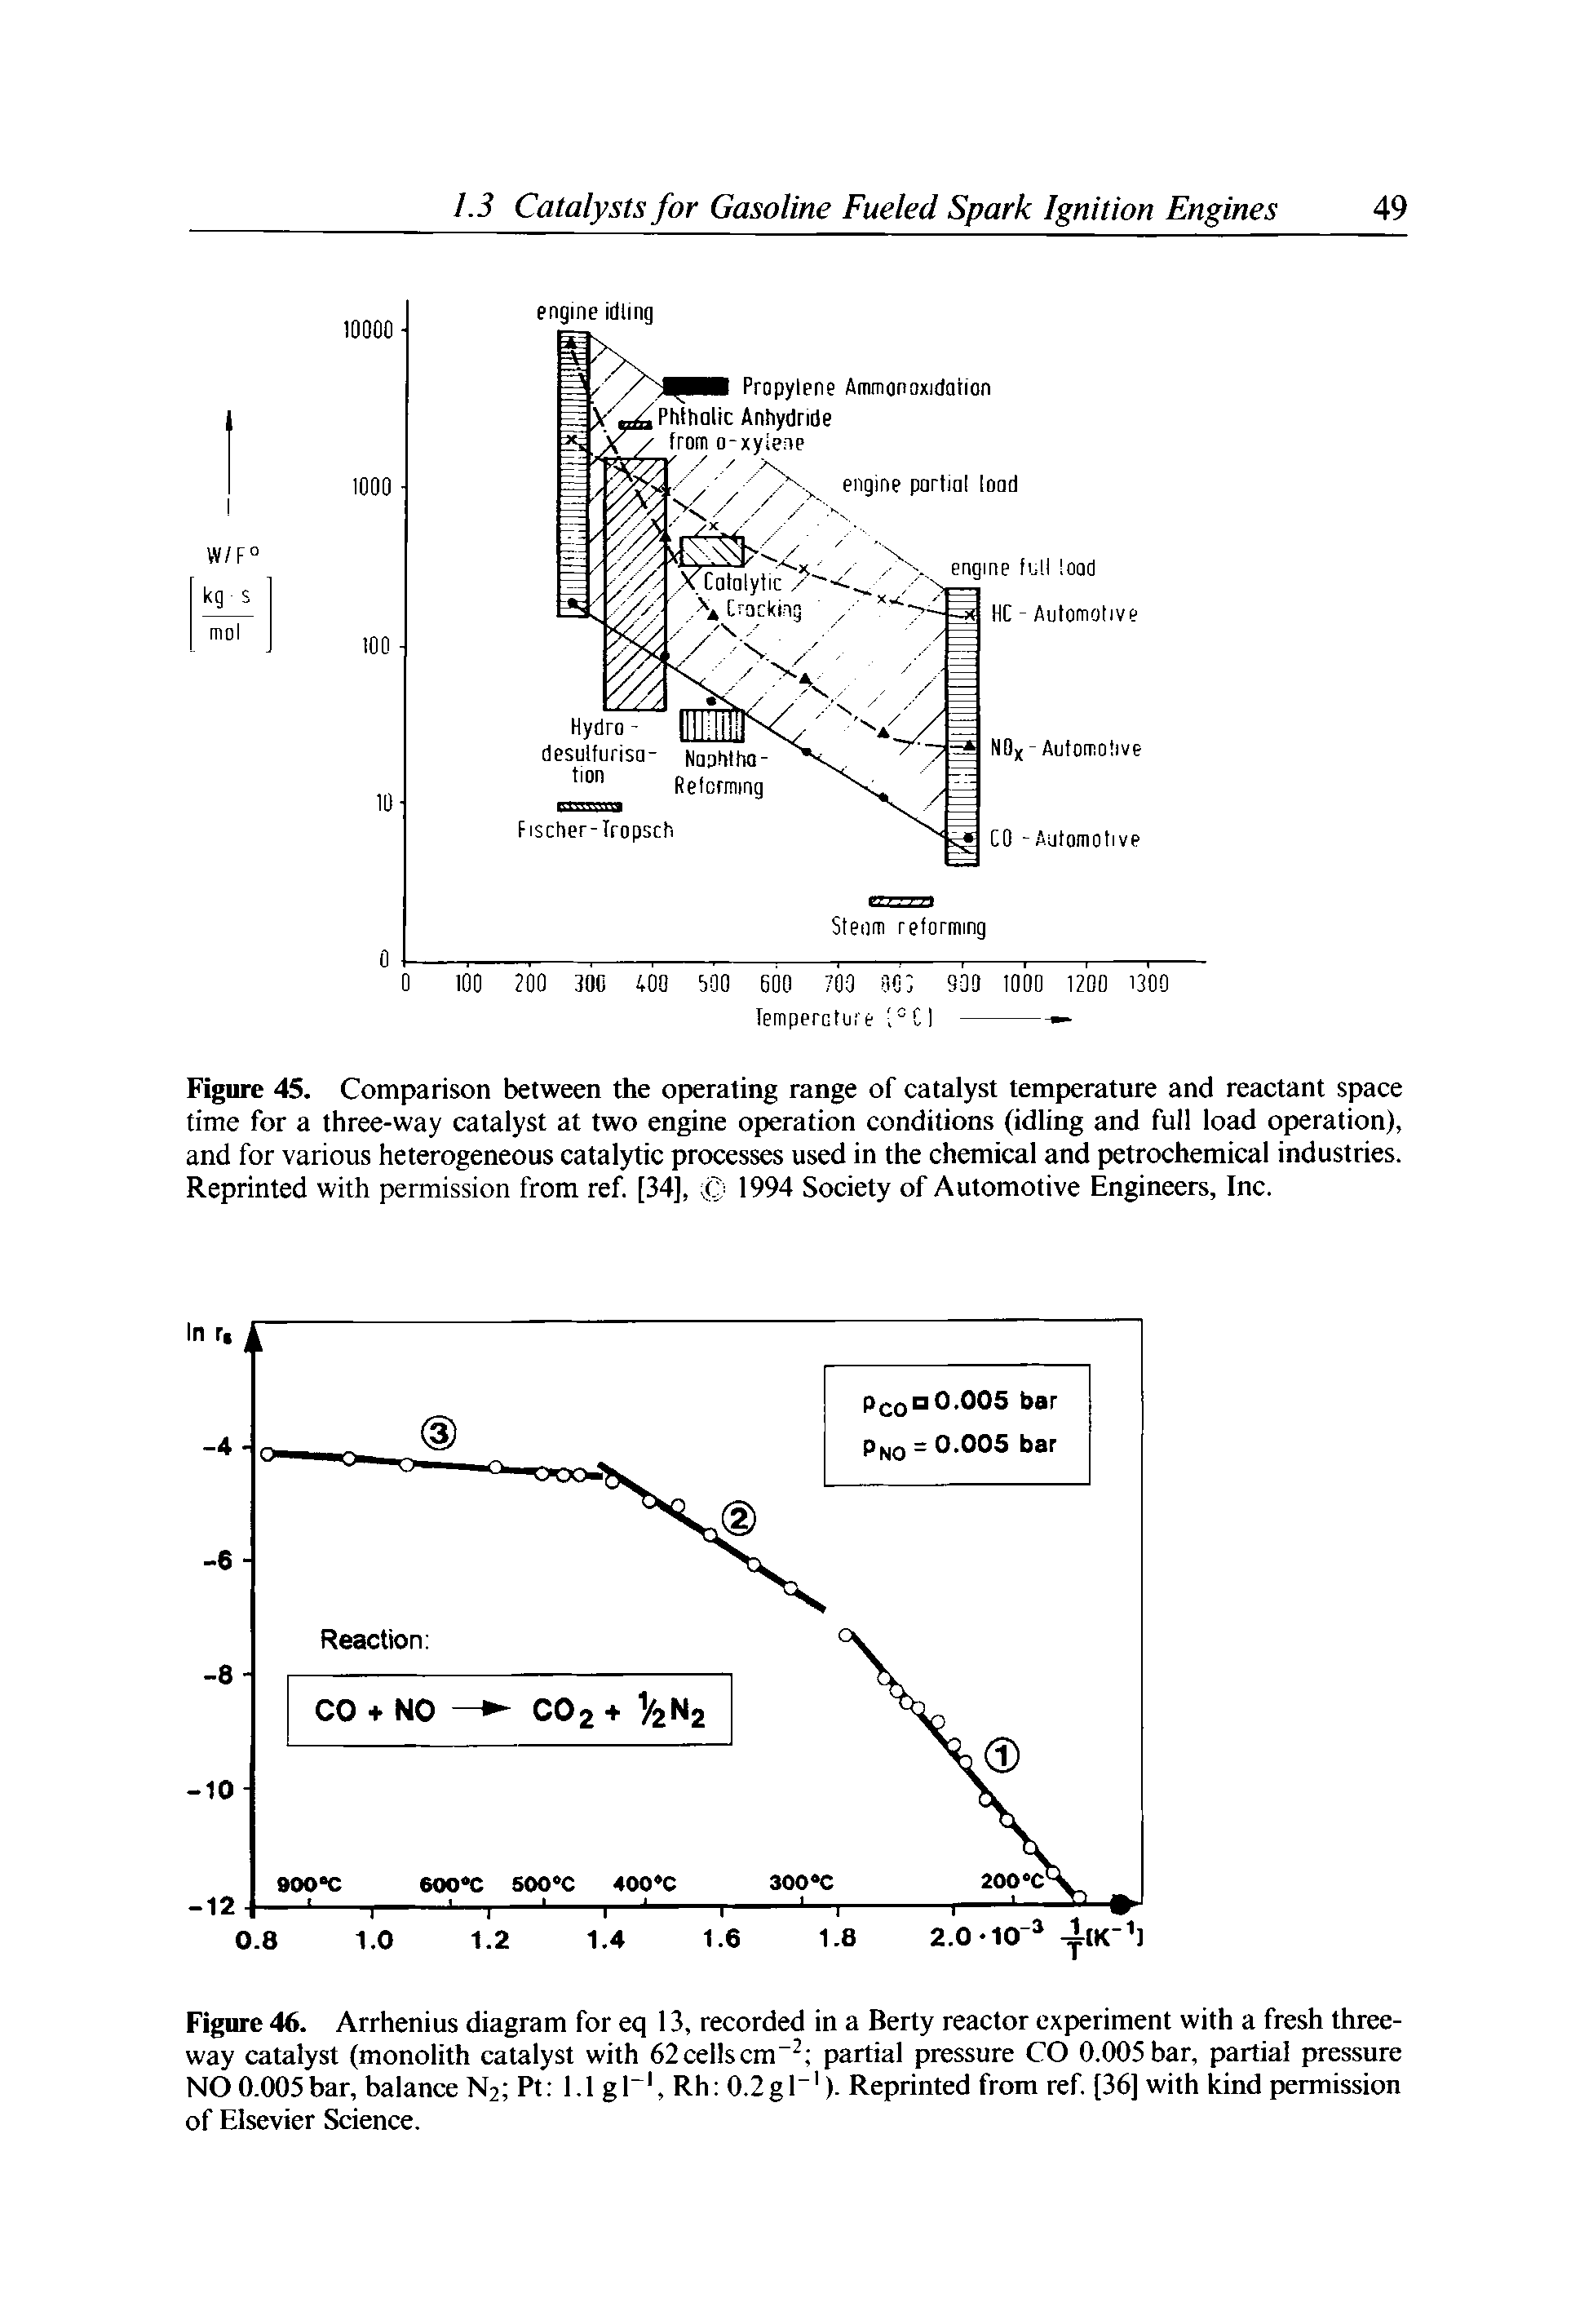 Figure 45. Comparison between the operating range of catalyst temperature and reactant space time for a three-way catalyst at two engine operation conditions (idling and full load operation), and for various heterogeneous catalytic processes used in the chemical and petrochemical industries. Reprinted with permission from ref. [34], 1994 Society of Automotive Engineers, Inc.